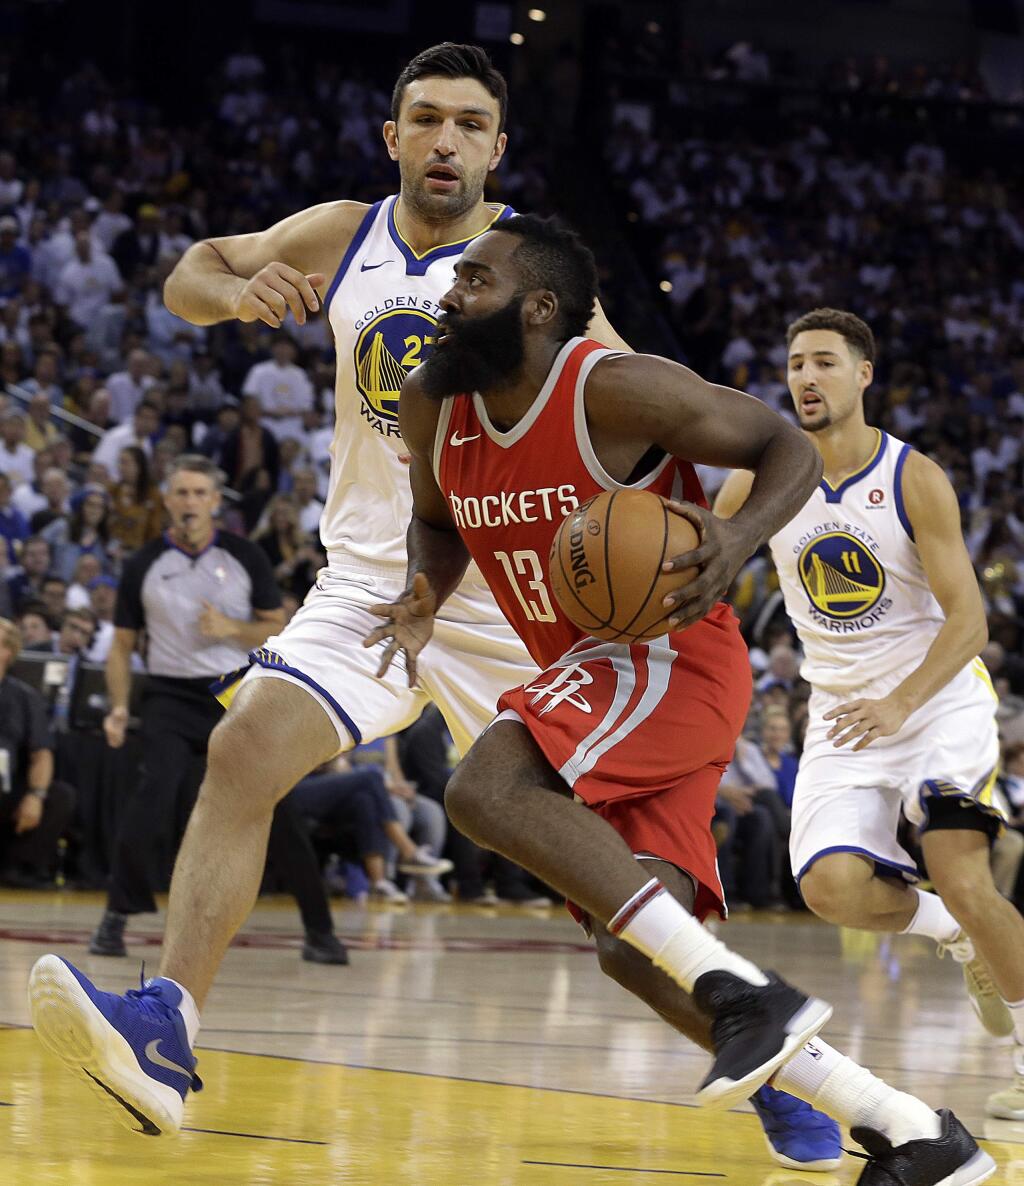 The Houston Rockets' James Harden drives the ball against the Golden State Warriors' Zaza Pachulia, left, during the first quarter Tuesday, Oct. 17, 2017, in Oakland. (AP Photo/Ben Margot)